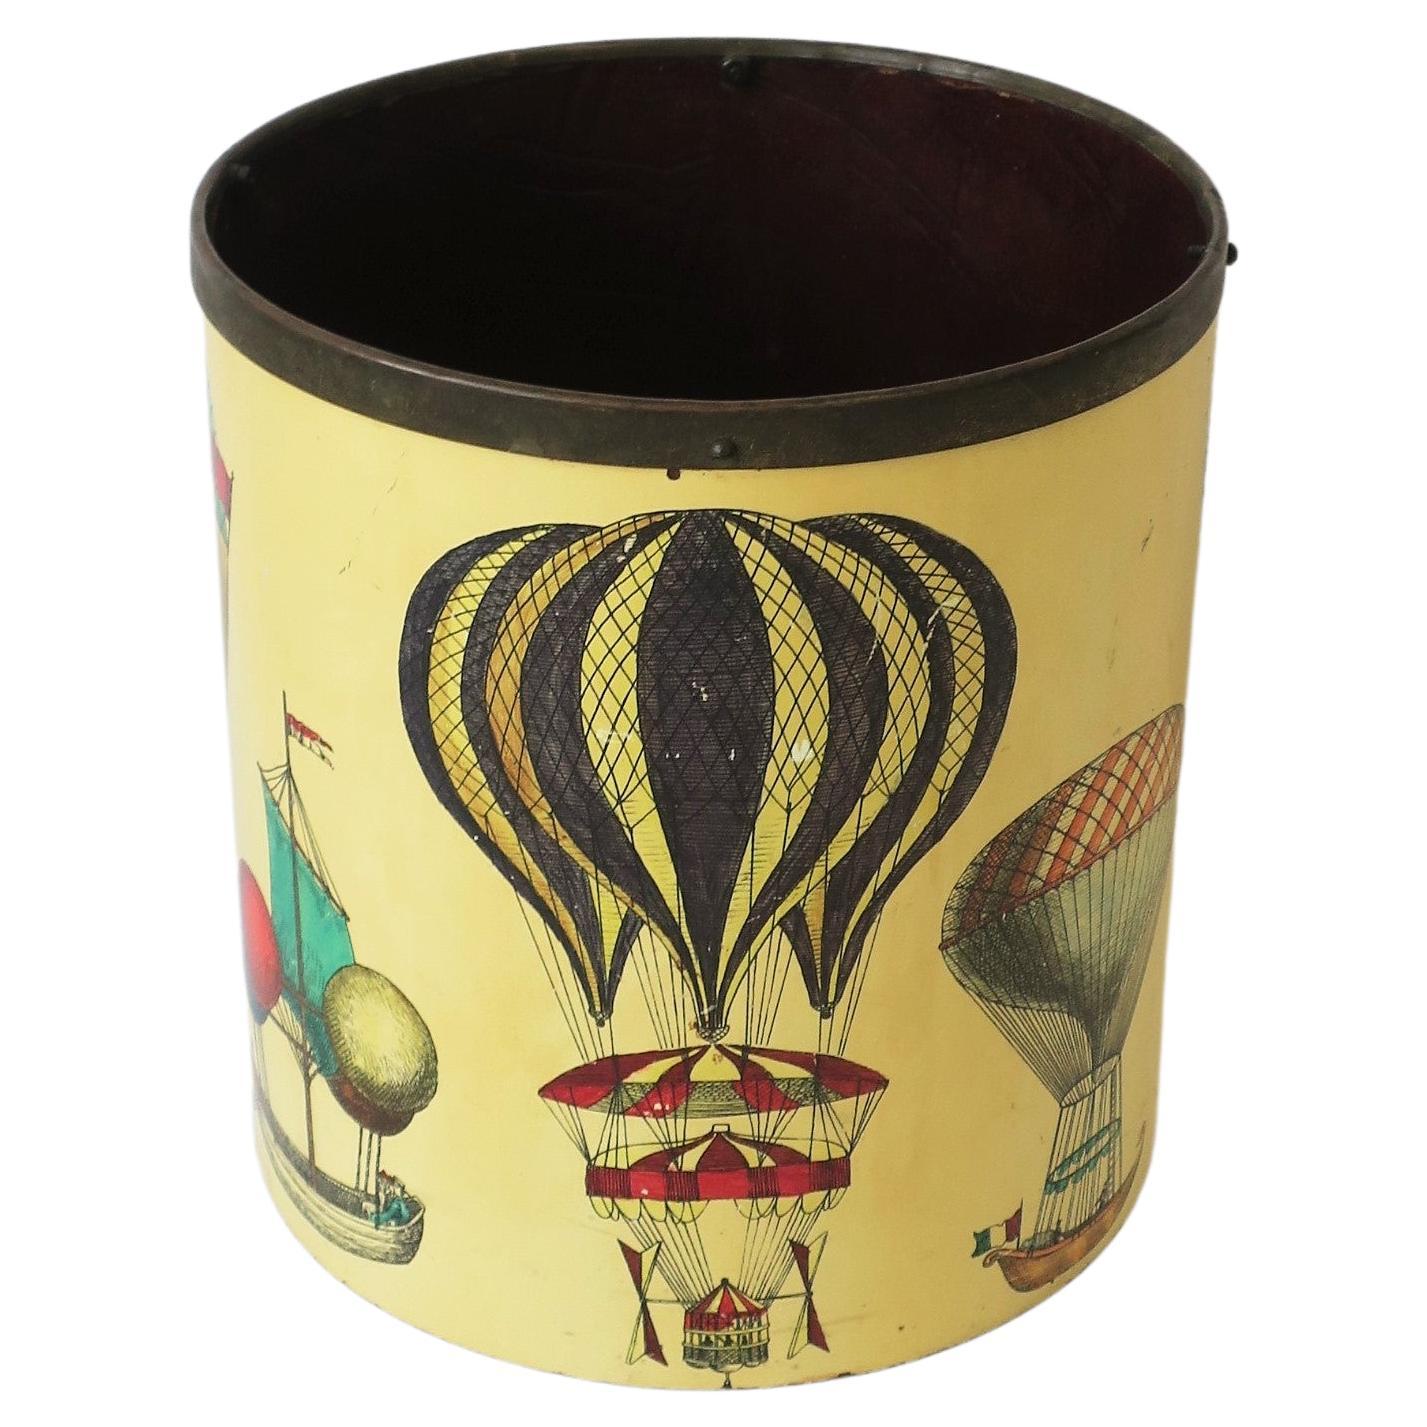 A beautiful and rare Italian wastebasket trash can with colorful hot air balloon design by Piero Fornasetti, circa mid-20th century, 1950s, Italy. Marked on bottom as shown in last two images, images #13 and 14. Collectable design, and a great piece